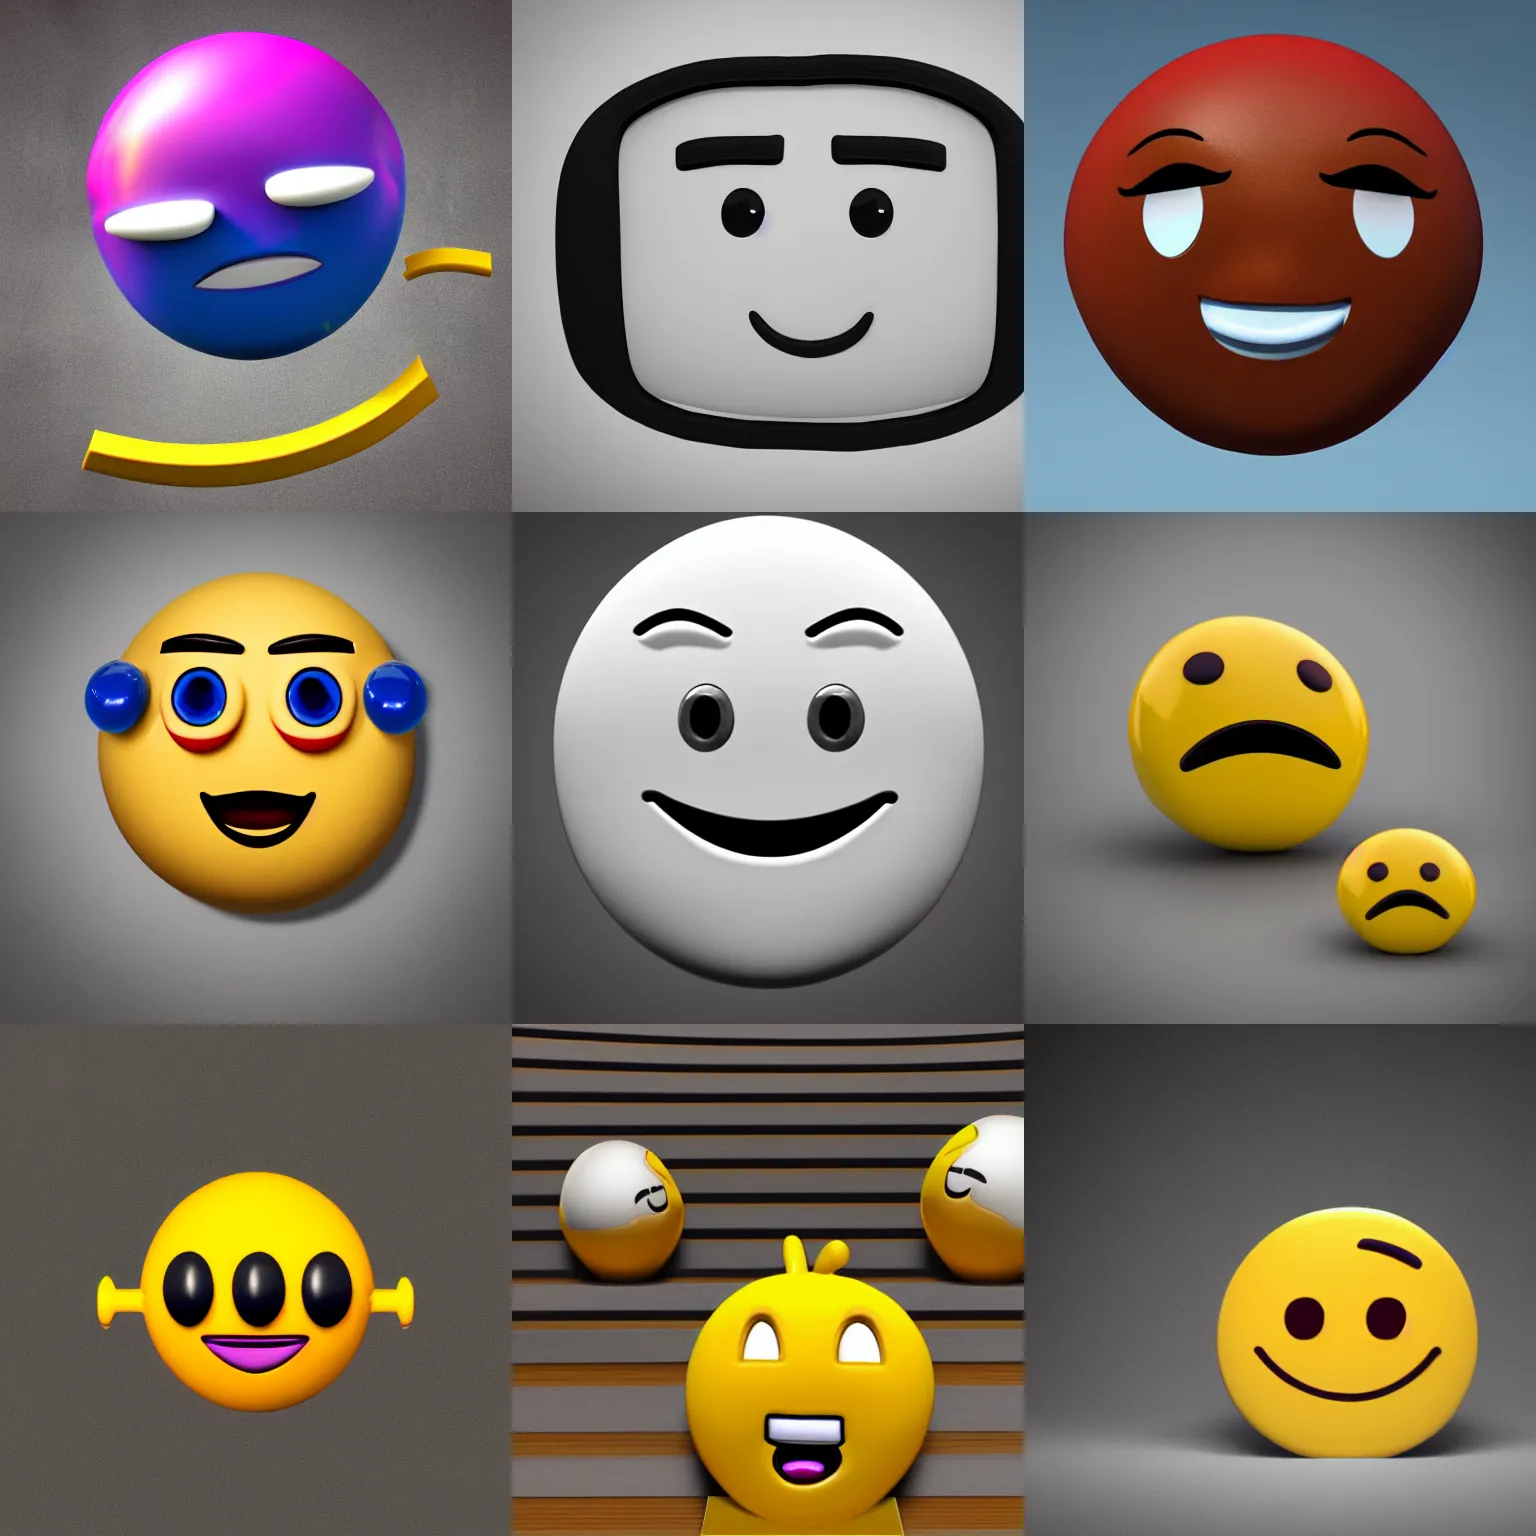 Prompt: 3 d render of an emoji that has never been seen before